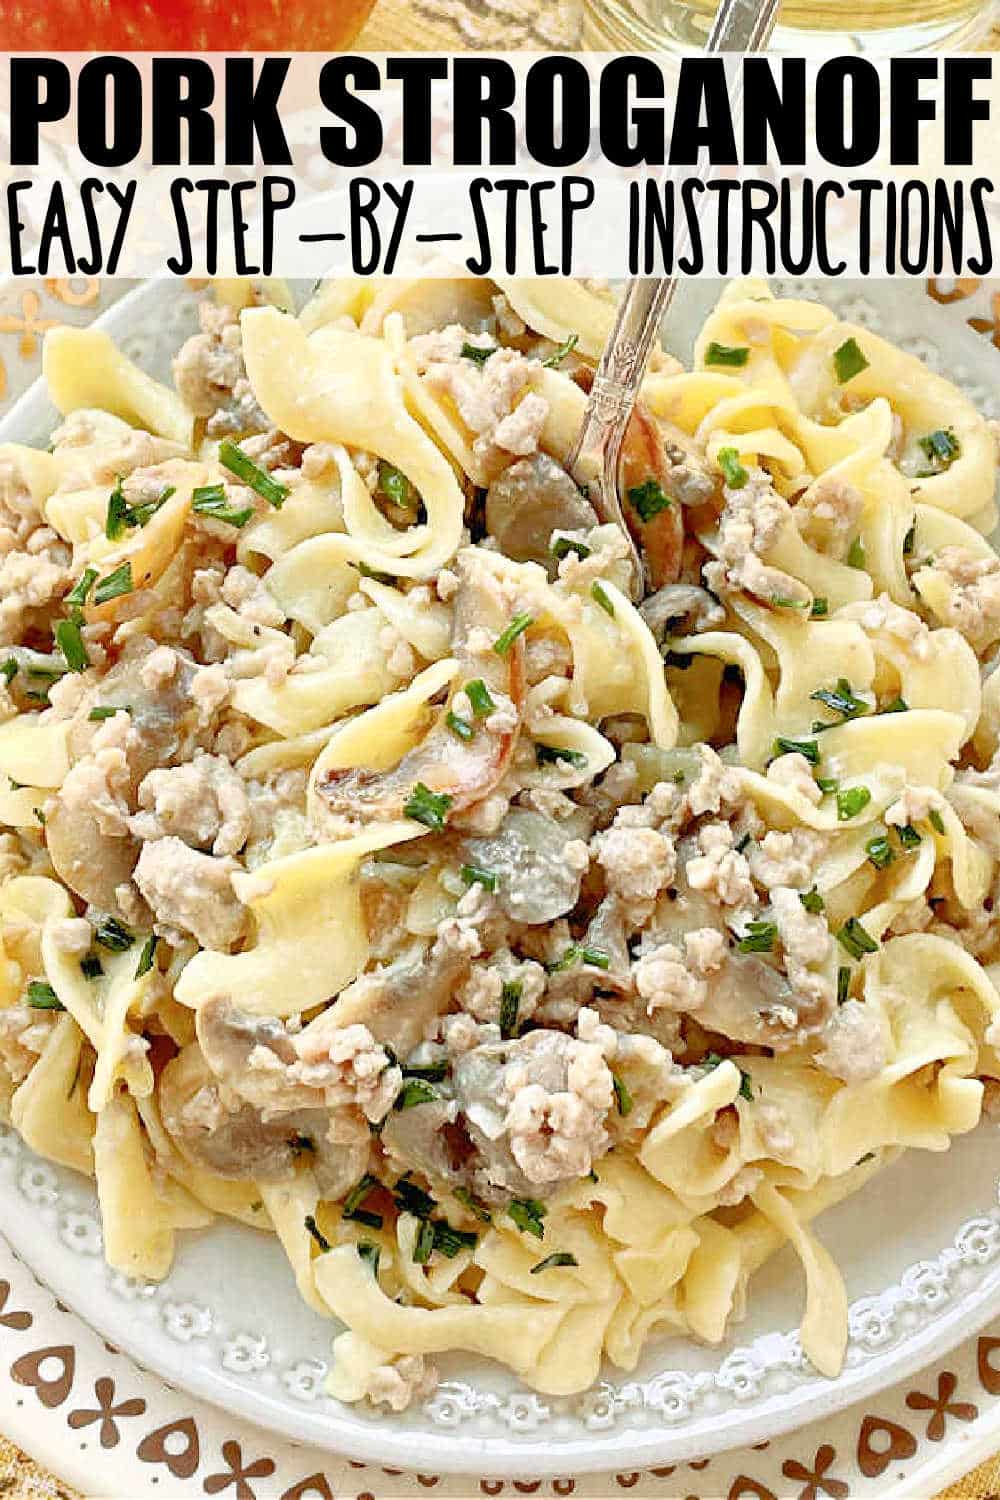 Pork Stroganoff is quick, creamy, comfort food with a lighter twist. Tender pork combines with buttery mushrooms and sweet apples in a tangy sour cream sauce.